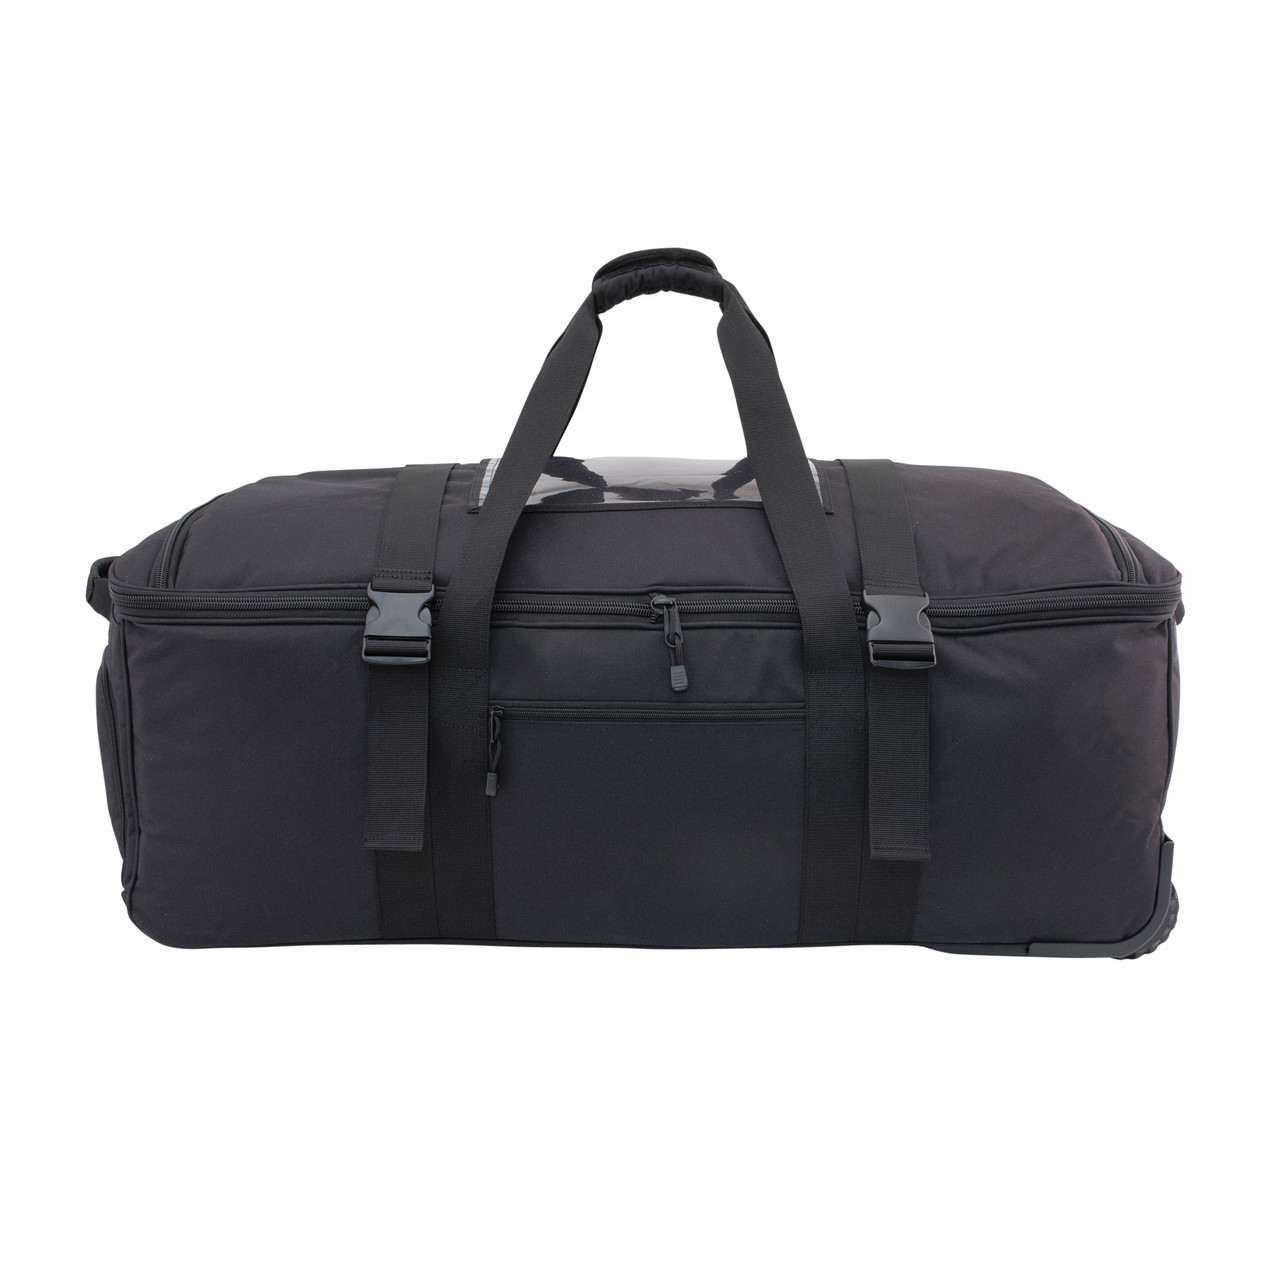 Black 37 Inch Rolling Deployment Bag With Retractable Handle | Military ...